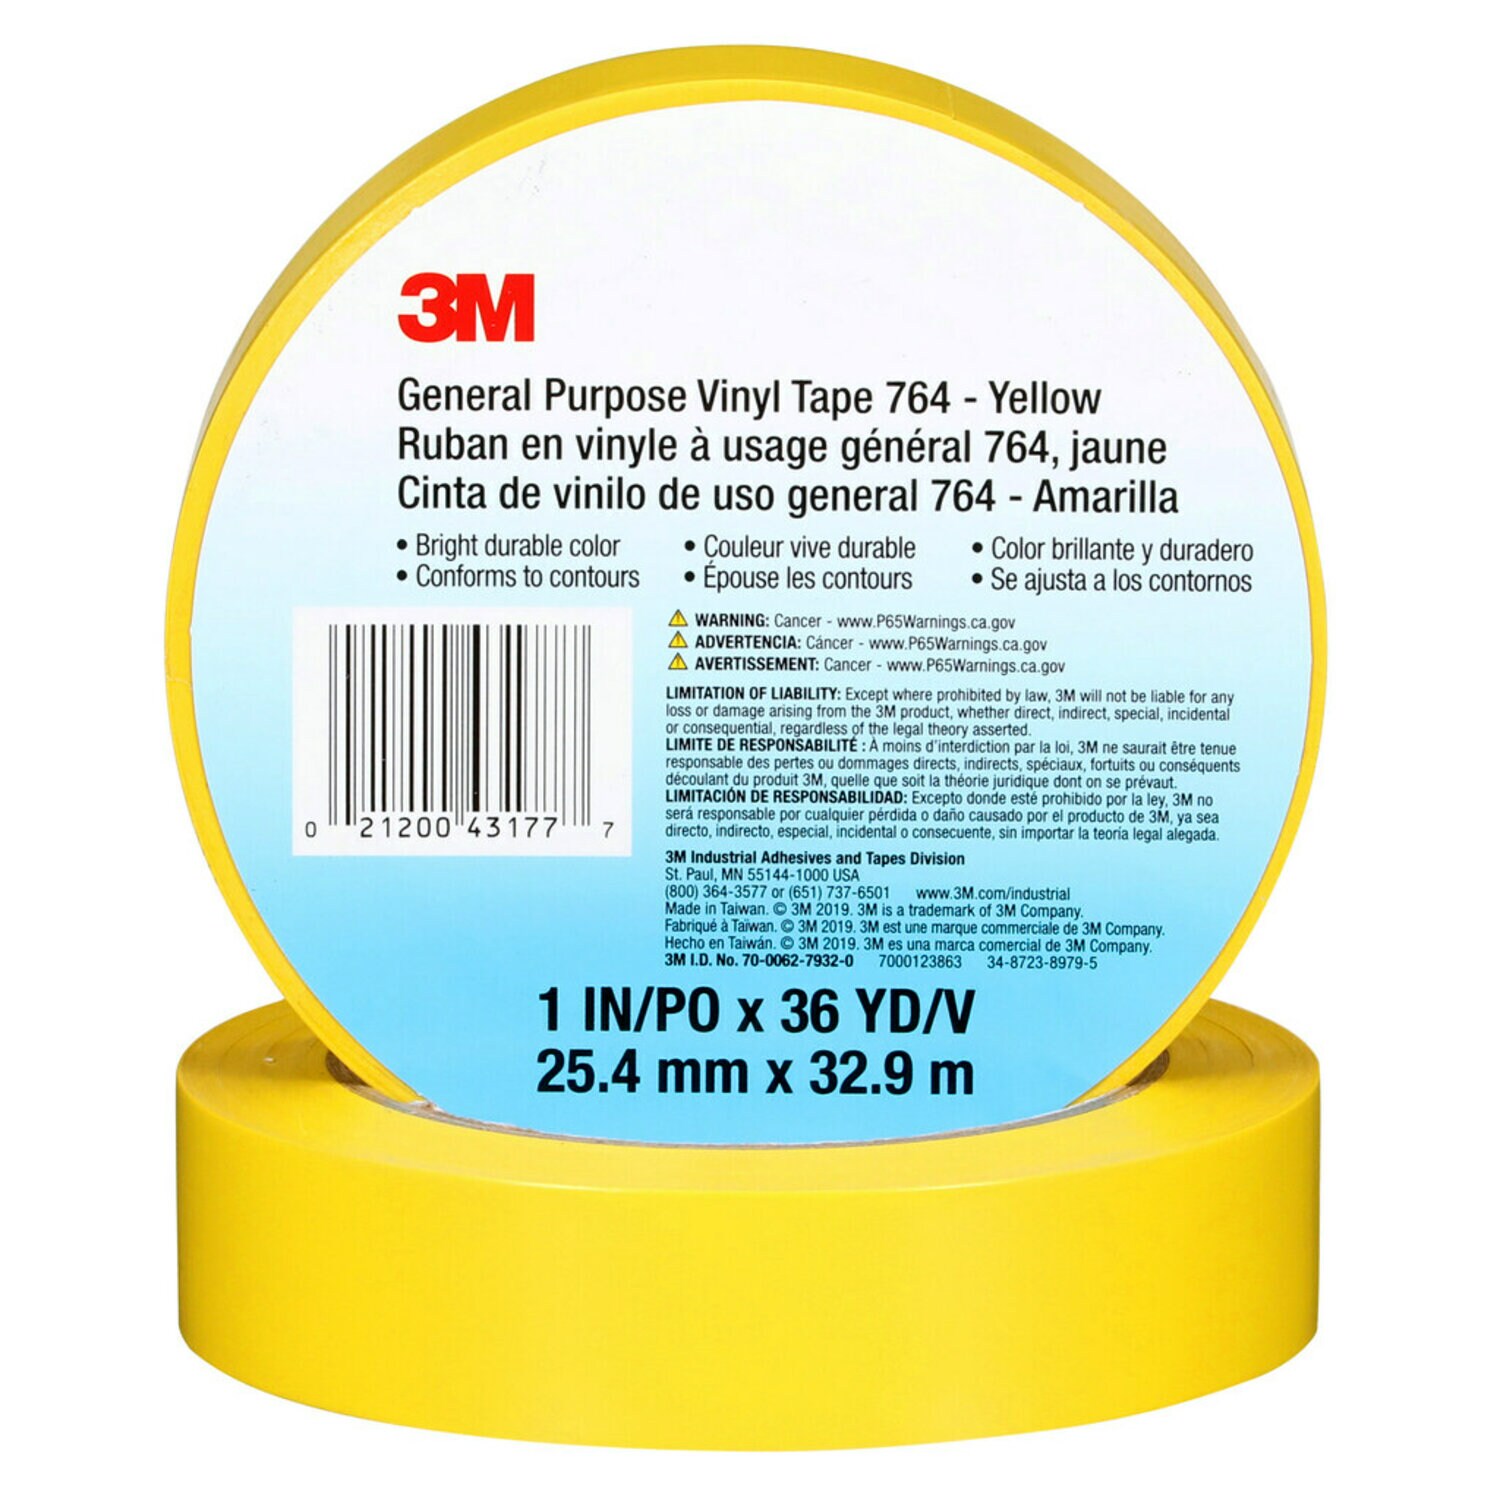 3M 2090 ScotchBlue Painters Tape - 0.5 in. x 180 ft. Masking Tape Roll for  Medium Adhesion. Painting Wall Preparation: Painters Masking Tape:  : Tools & Home Improvement